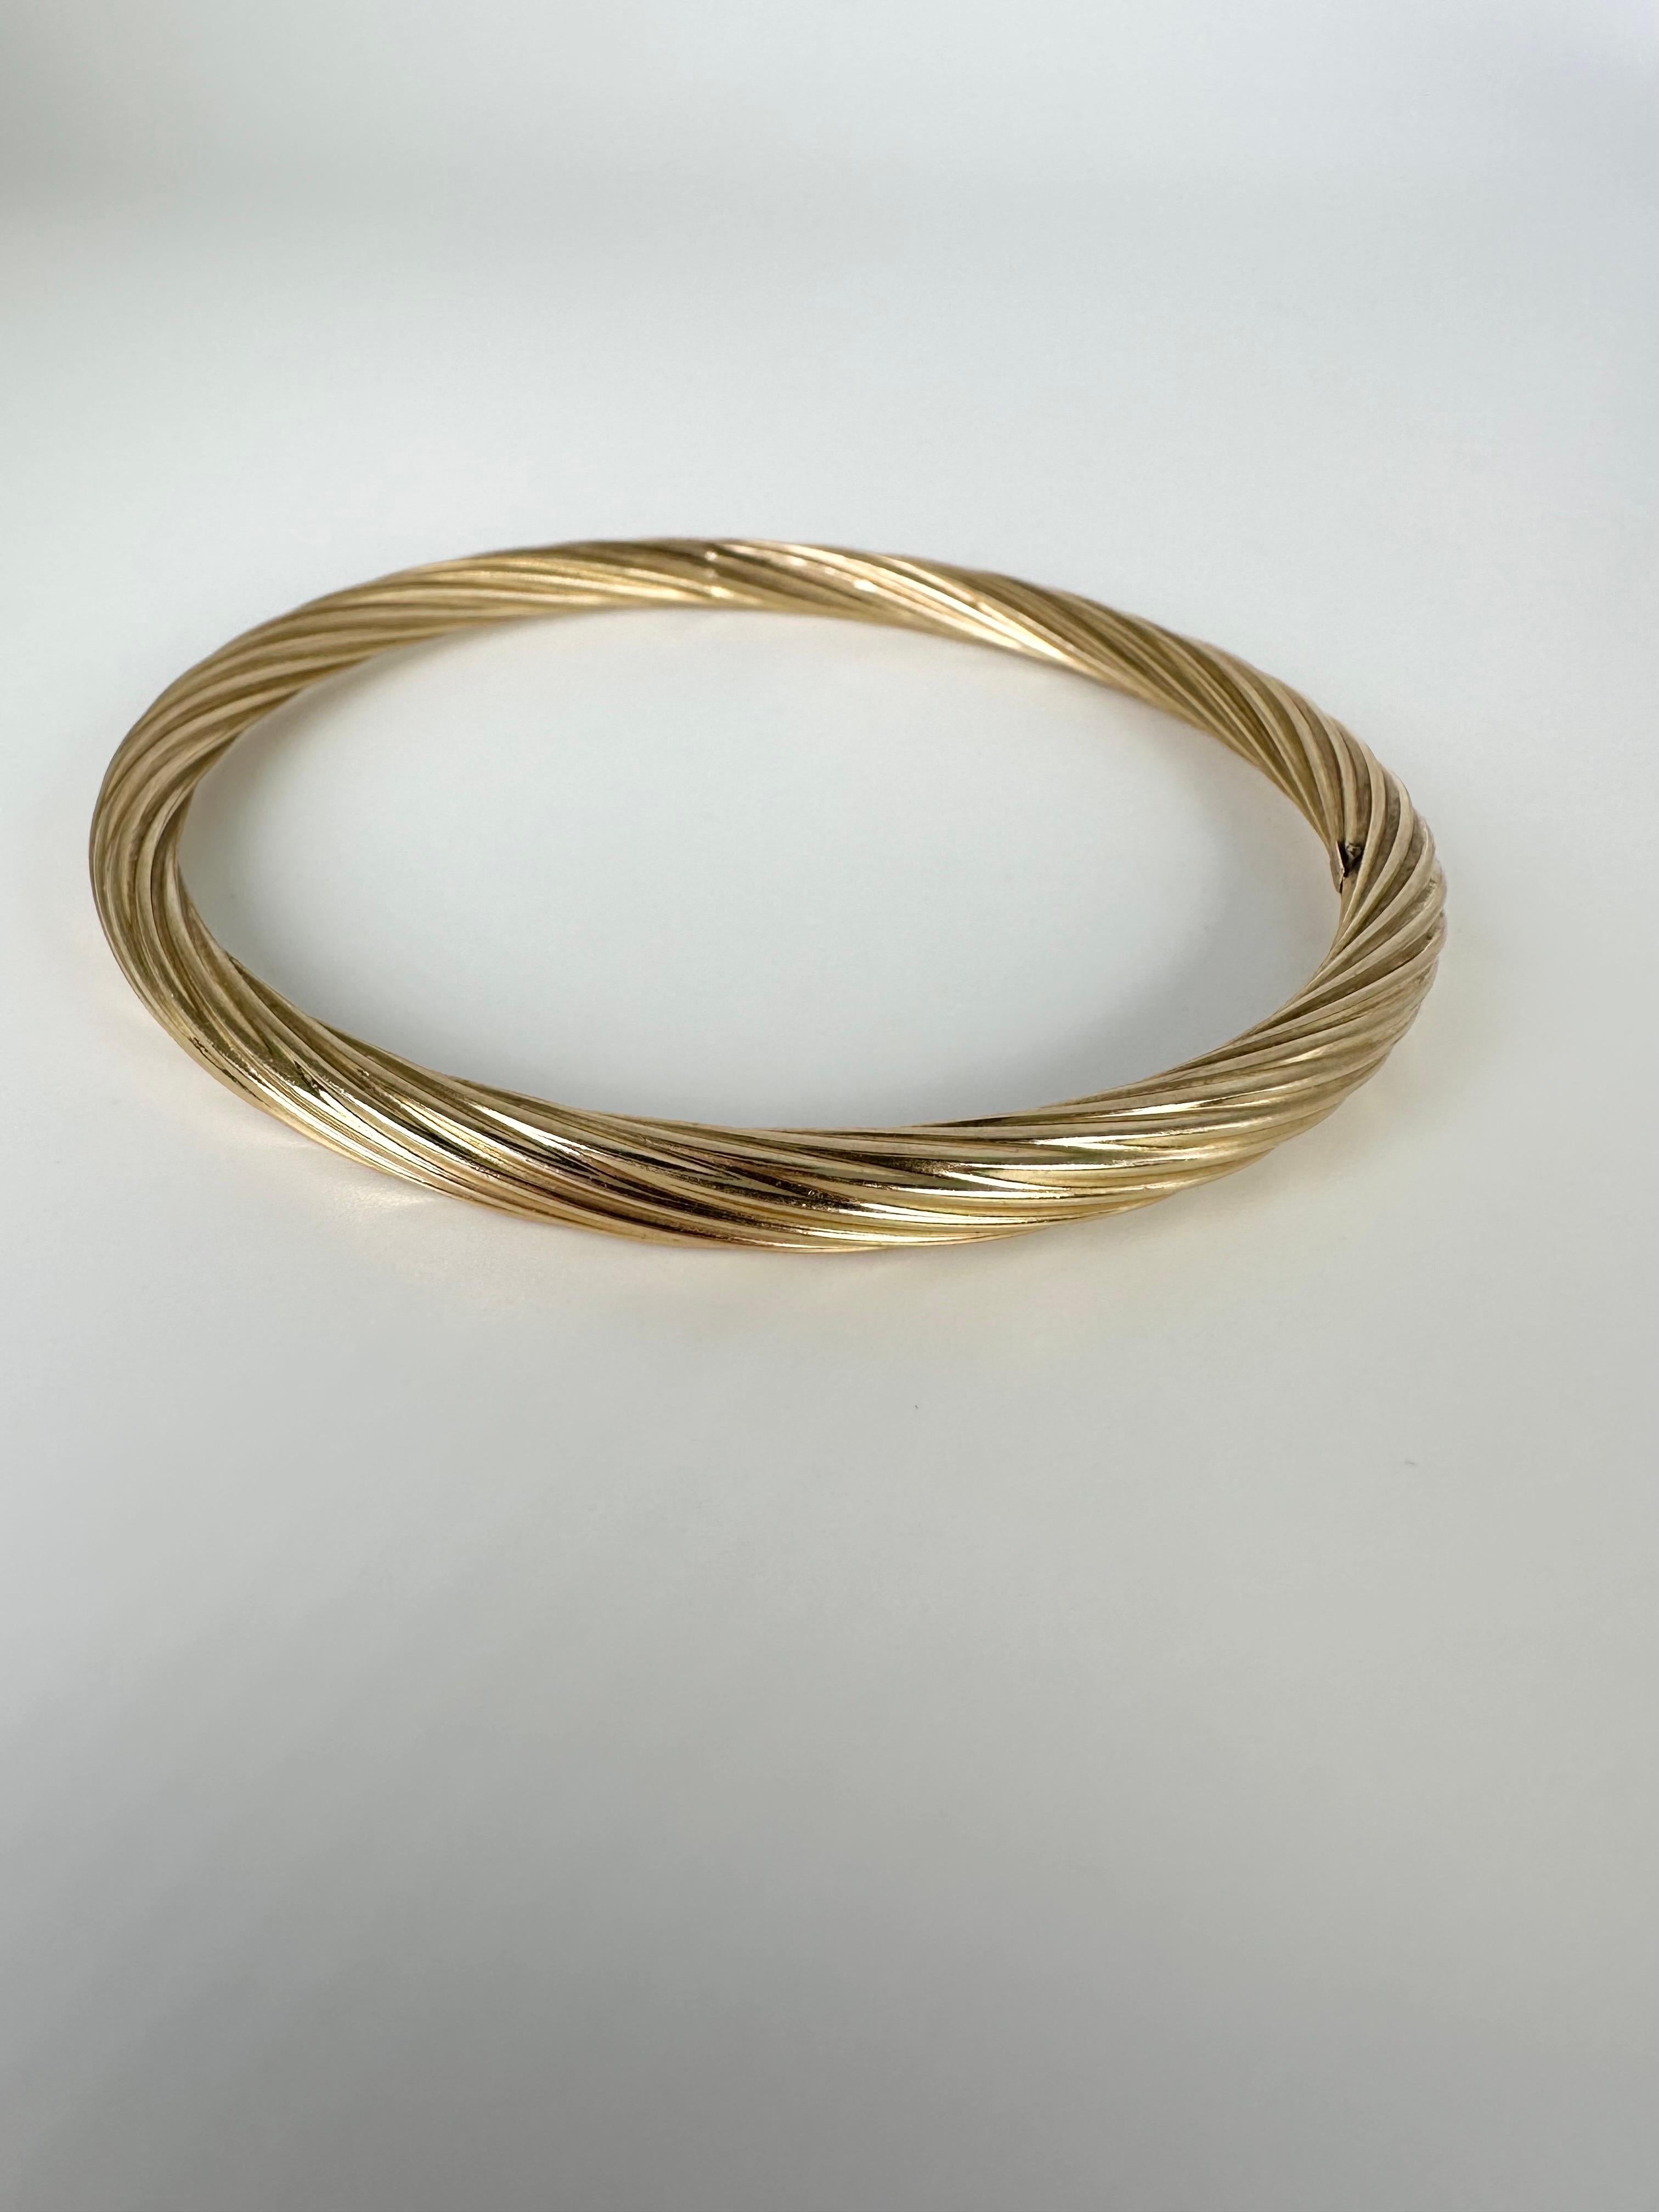 Unique twisted style halow bangle in 14KT yellow gold. Simple to slide on with approximately 7cm diameter and 5mm width of the bangle.

GOLD: 14KT gold
Grams: 8.10
Item#: 440-00044KTT

WHAT YOU GET AT STAMPAR JEWELERS:
Stampar Jewelers, located in